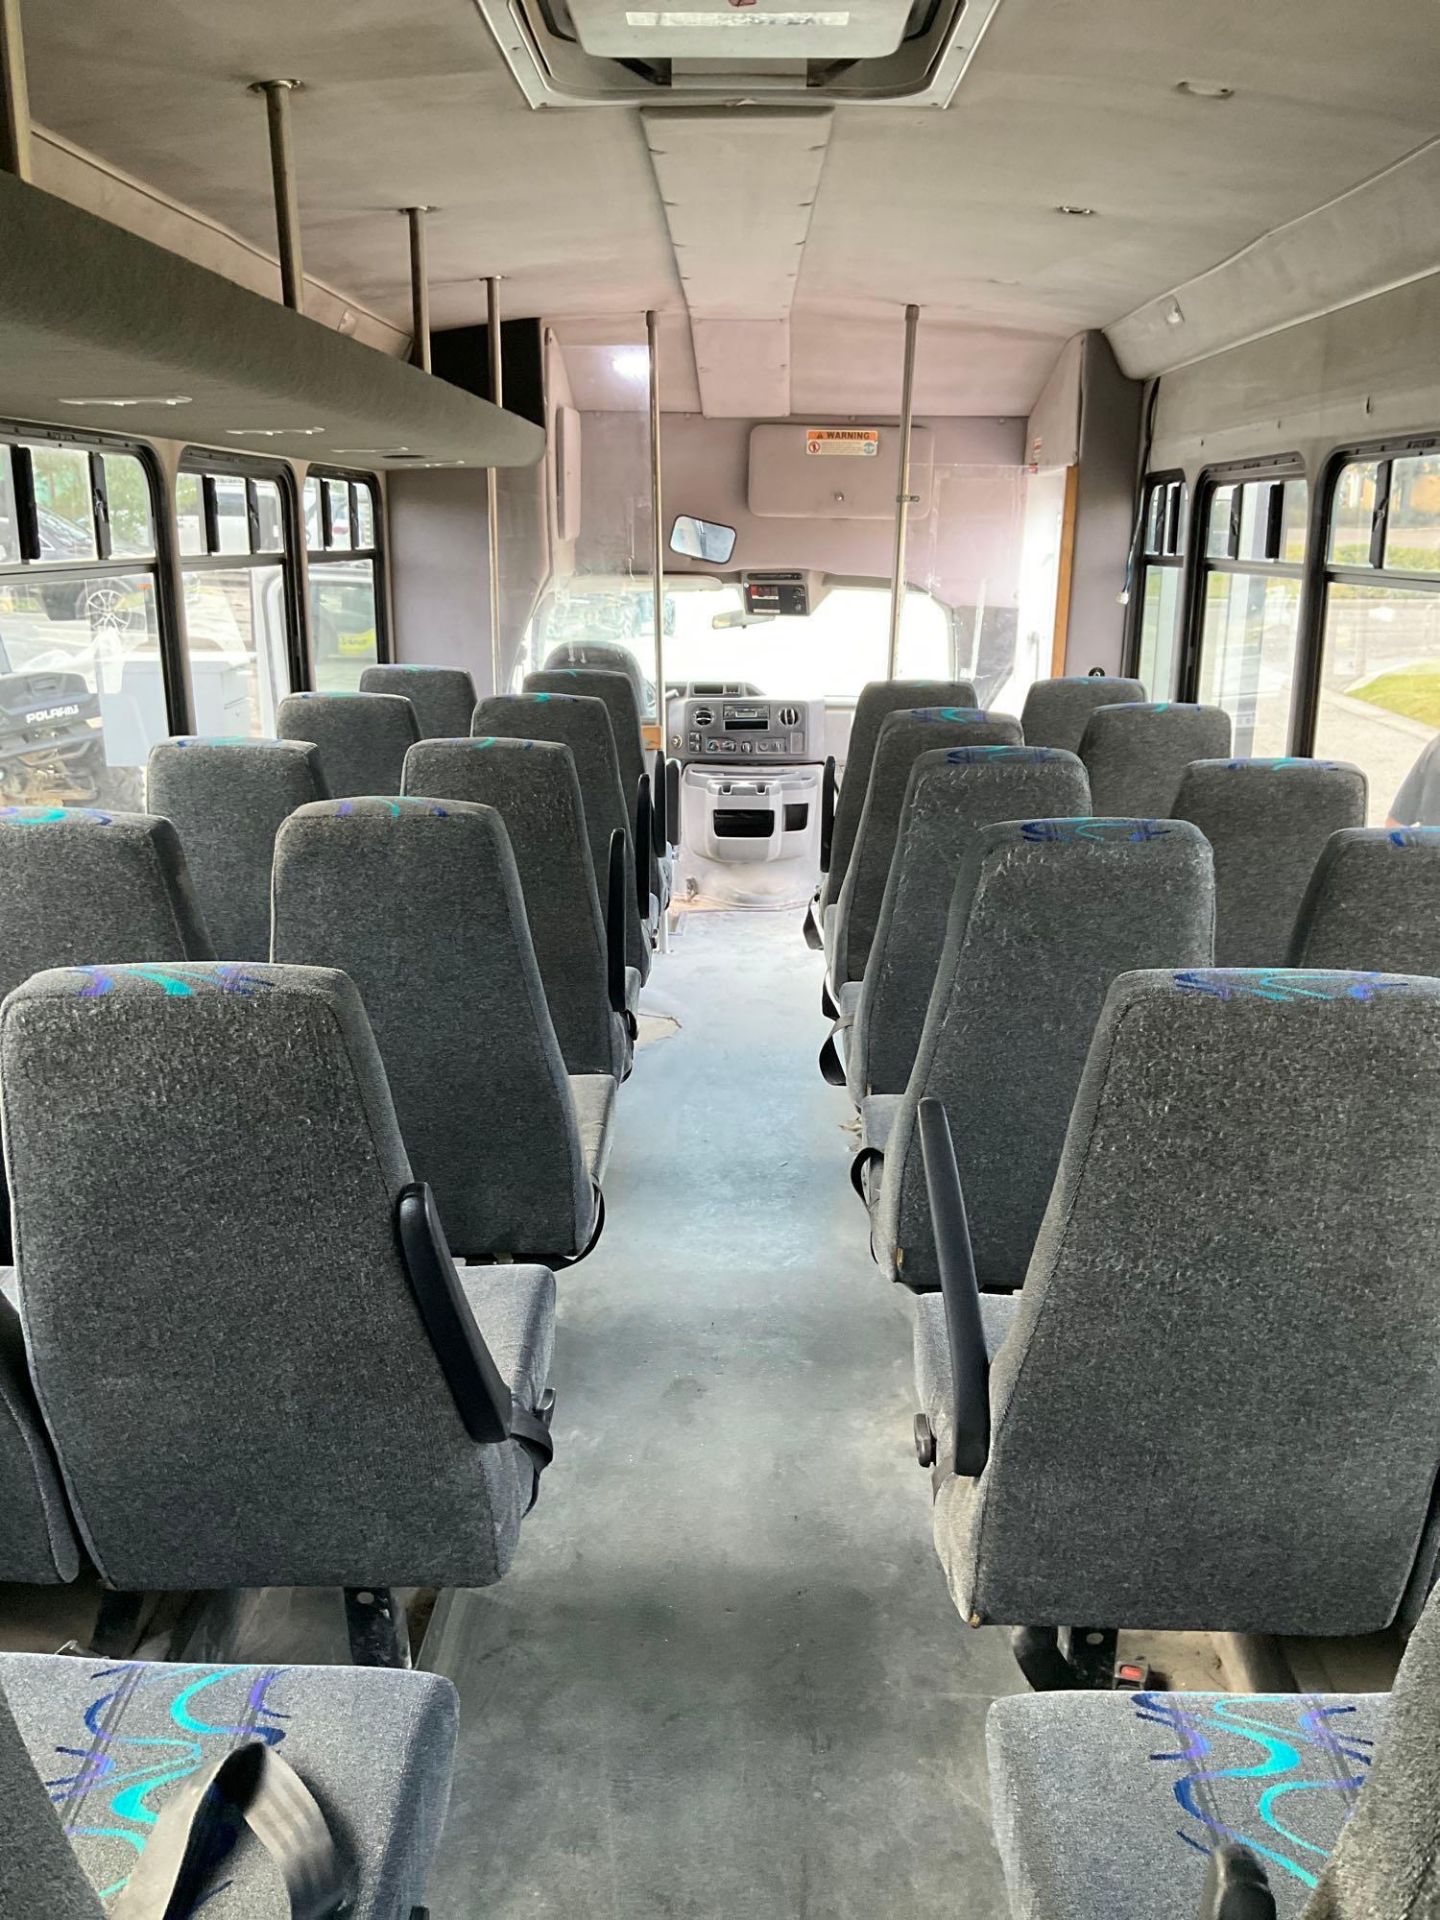 2018 FORD ECONOLINE 450 SHUTTLE BUS, GAS AUTOMATIC, 28 PASSENGER SEATING - Image 16 of 31